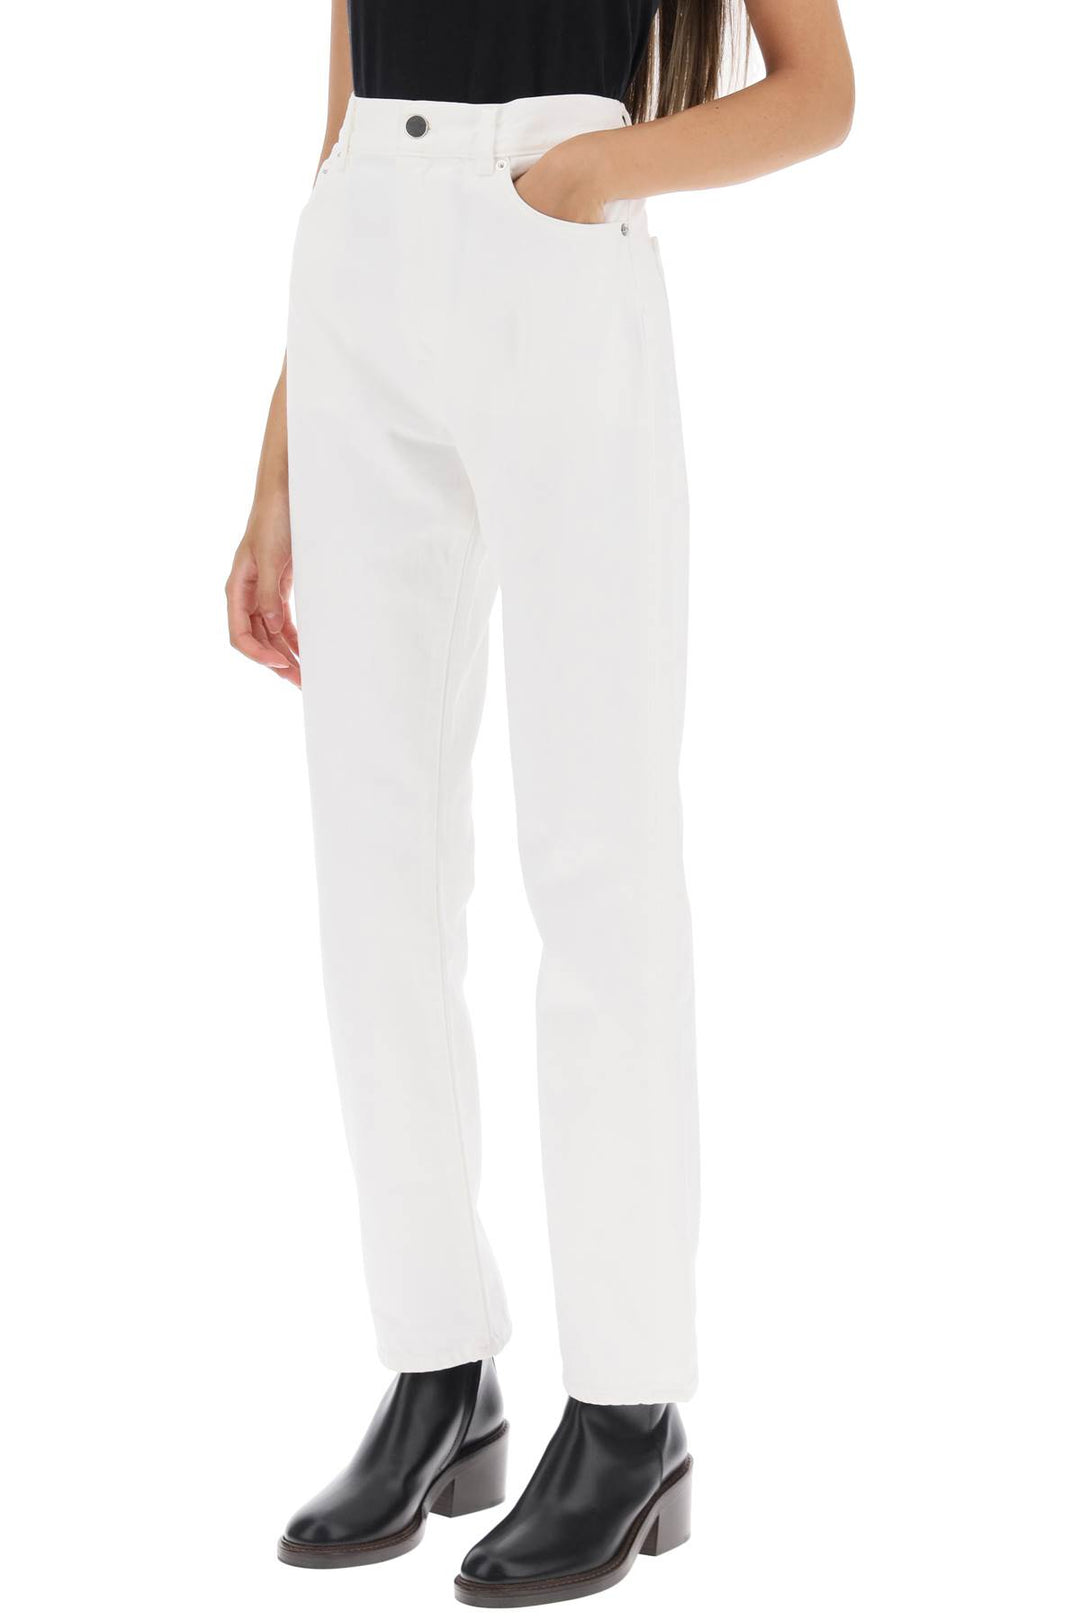 Loulou Studio Cropped Straight Cut Jeans   Bianco